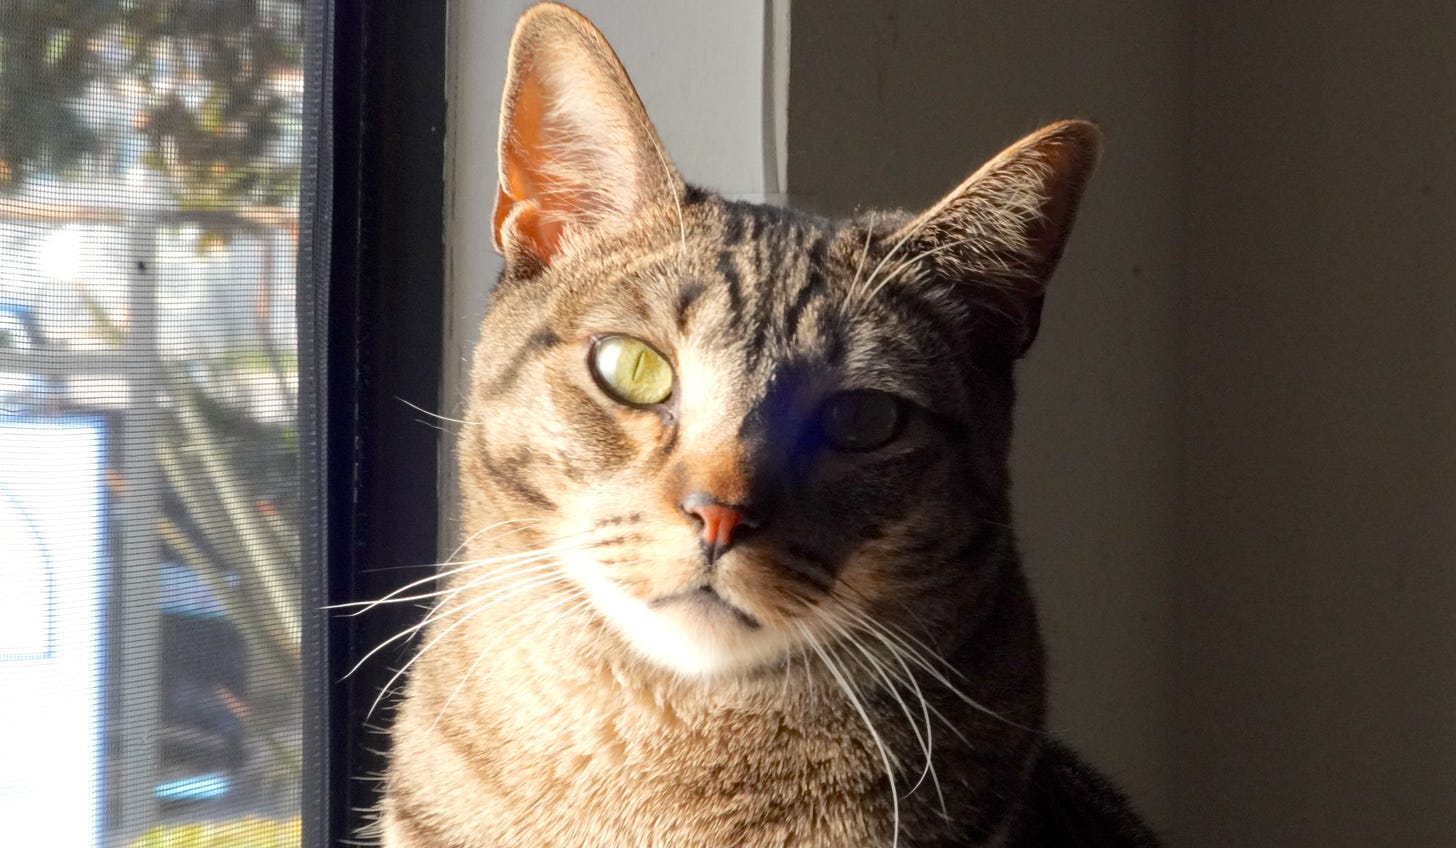 A striped tabby cat with green eyes sitting on a window looking at the viewer. He has questions.